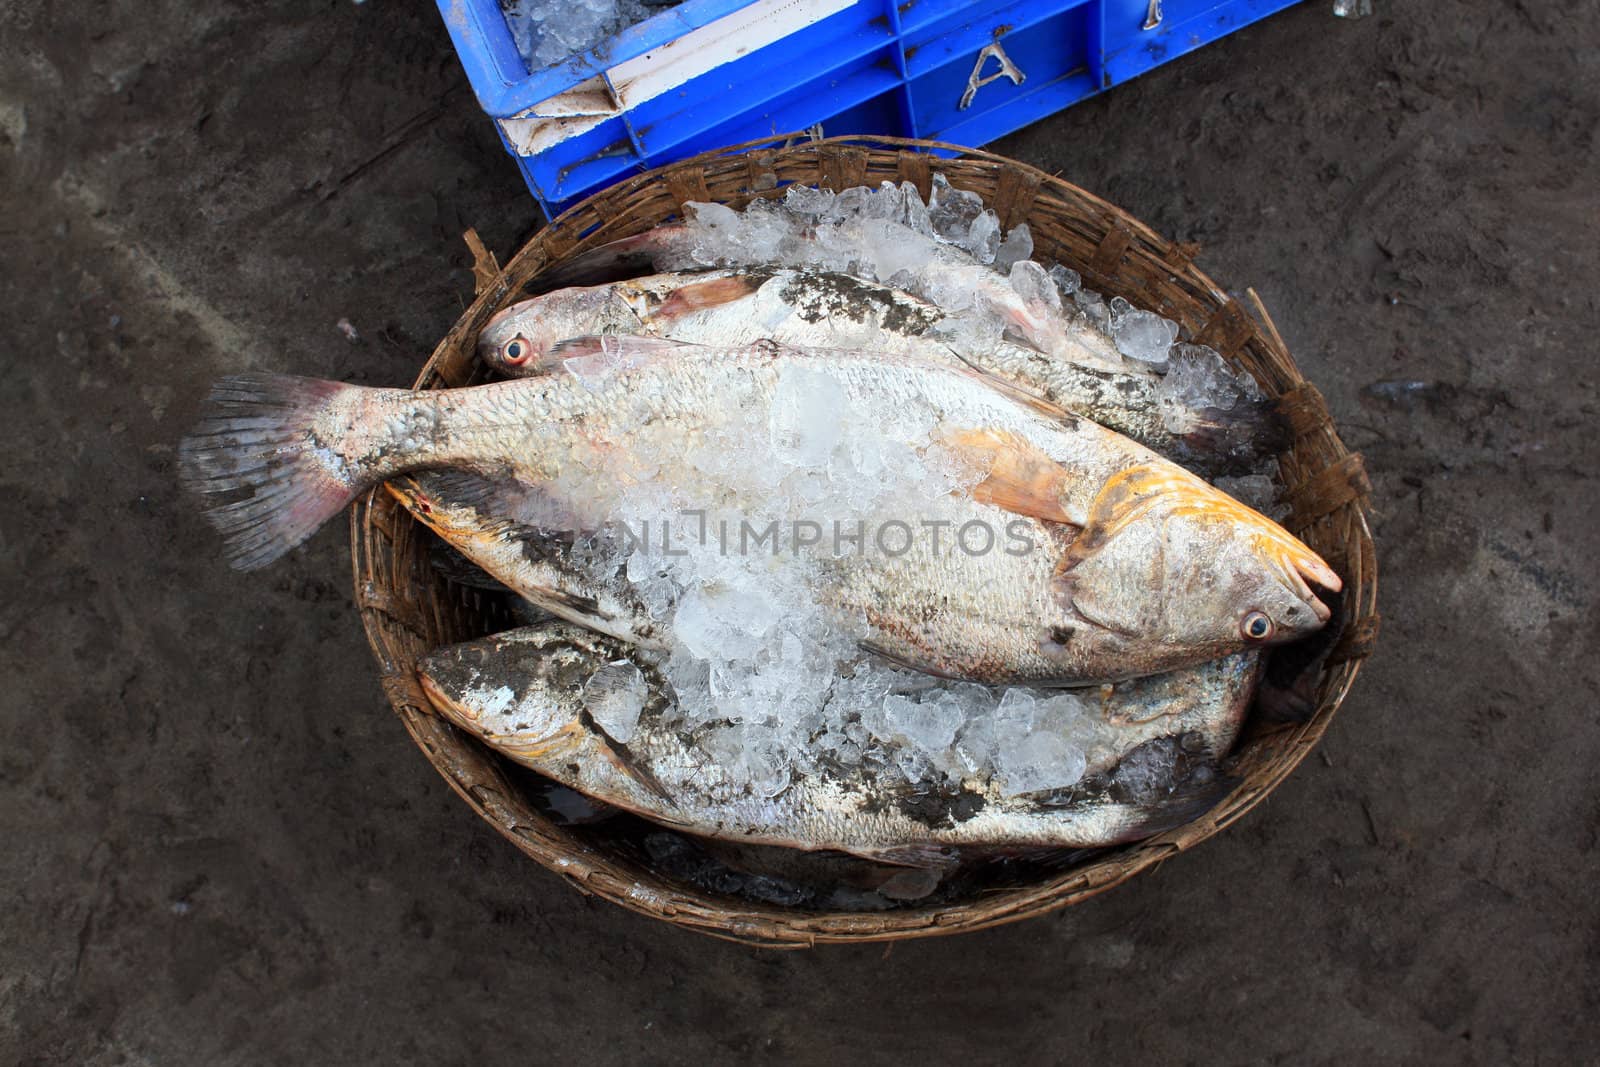 A basket containing freshly caught fish with ice to preserve the freshness.